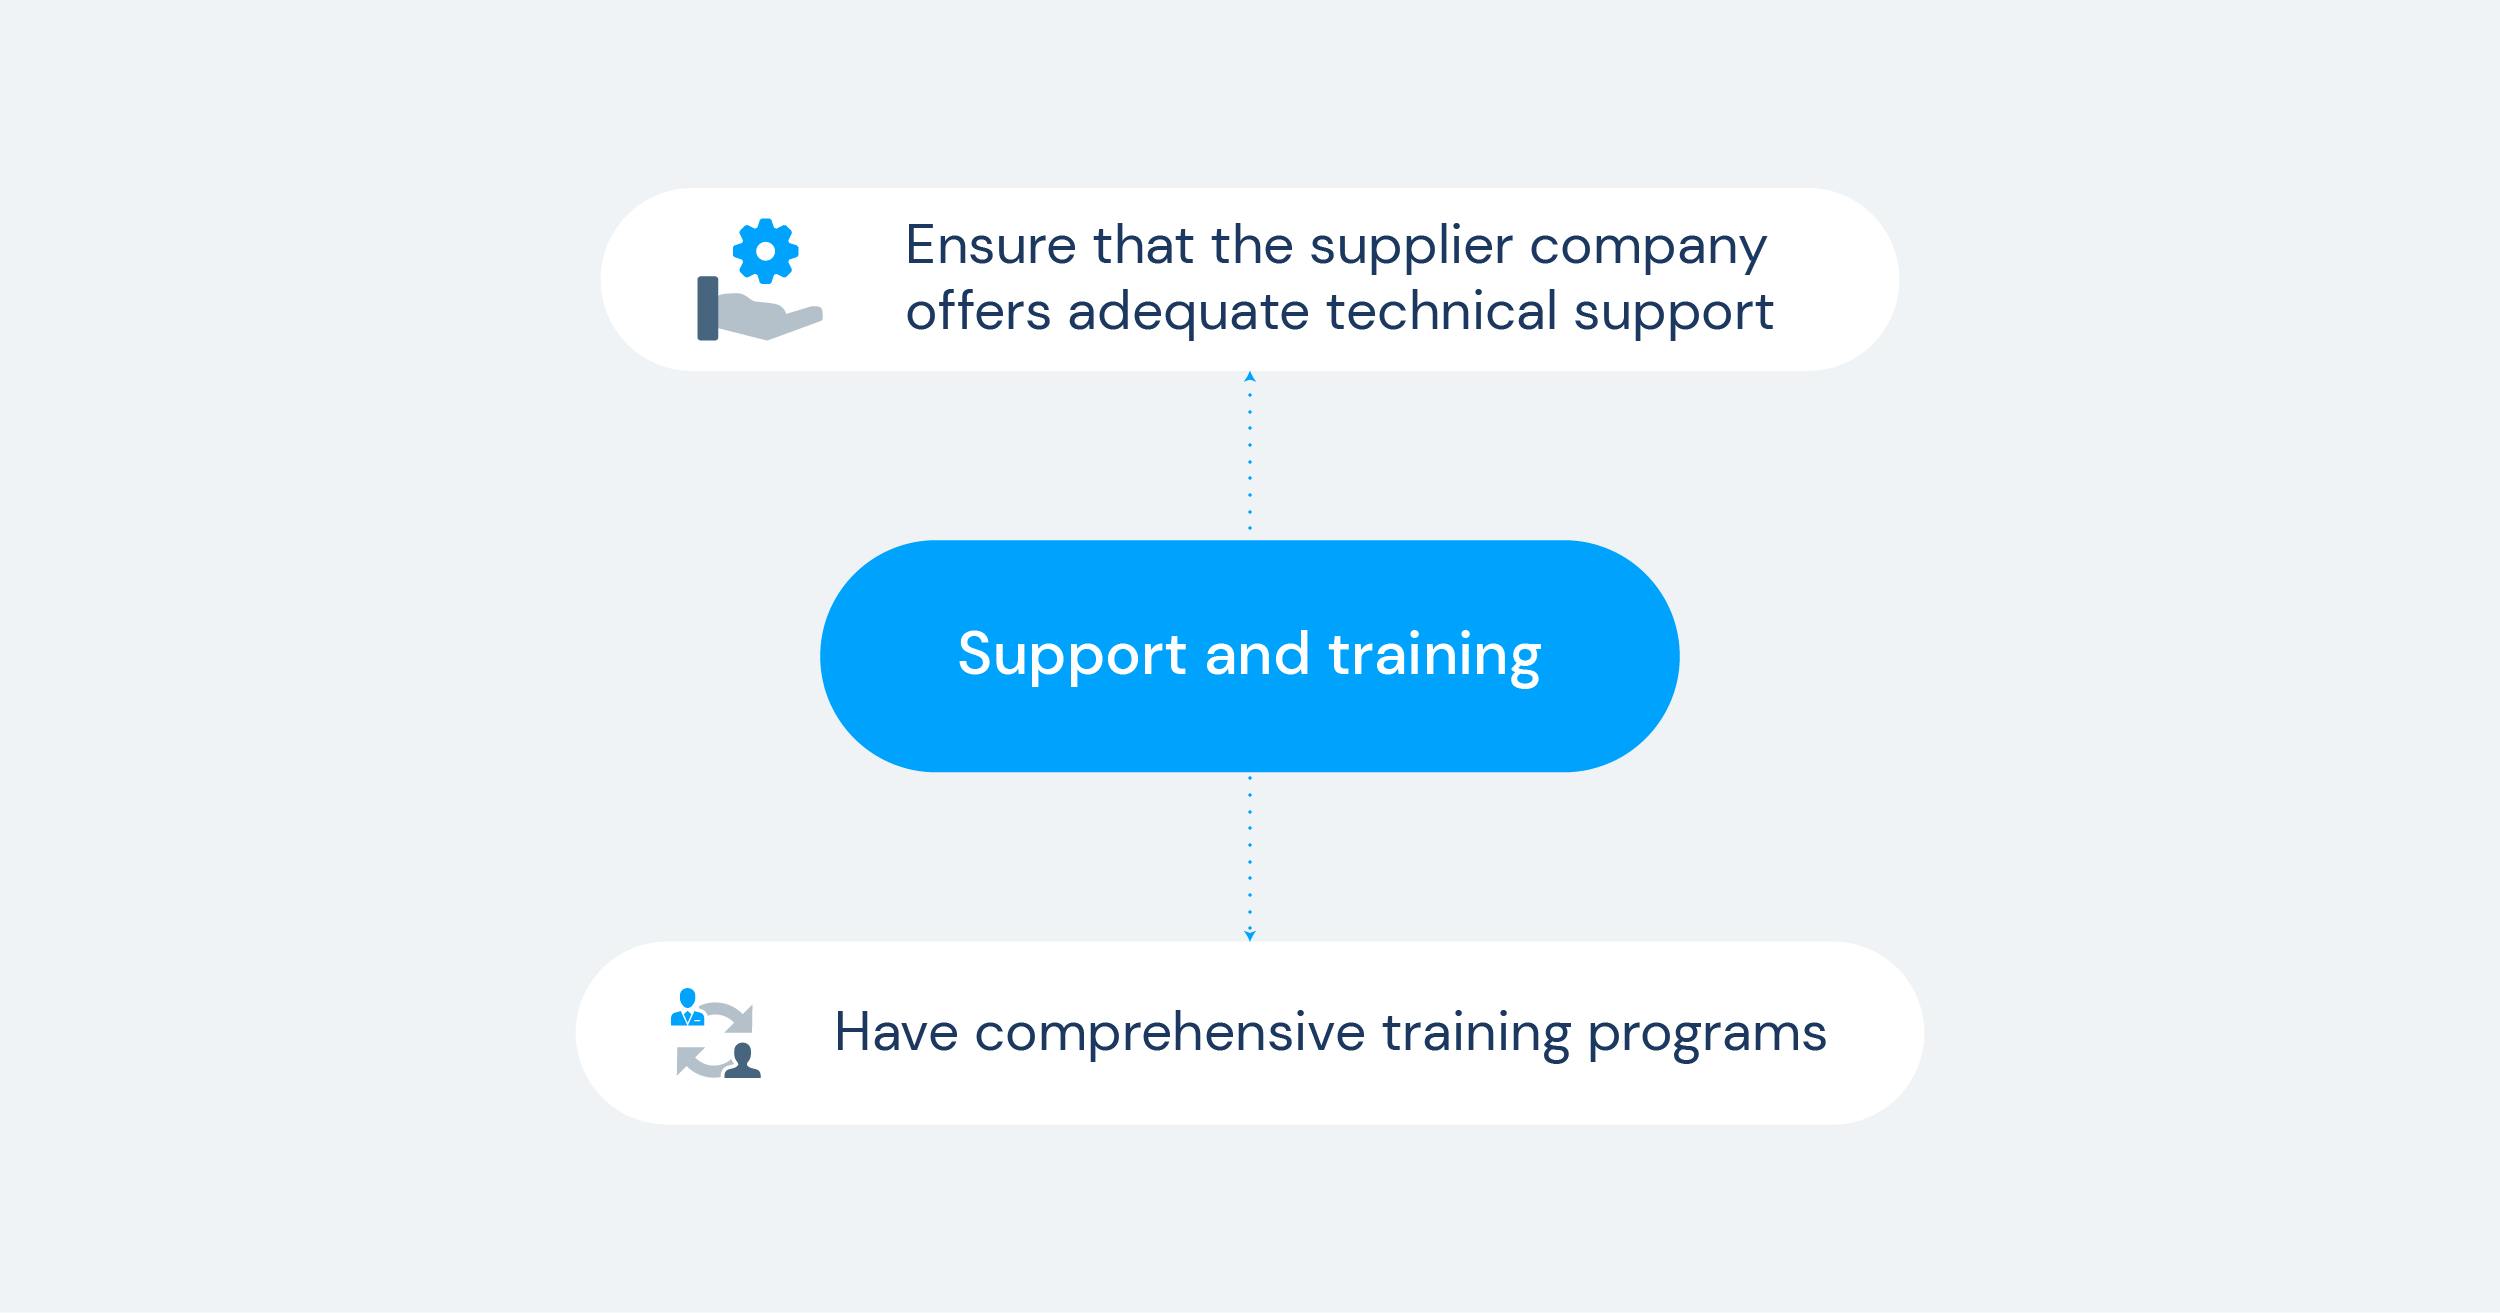 Support and training as key consideration when choosing a health platform